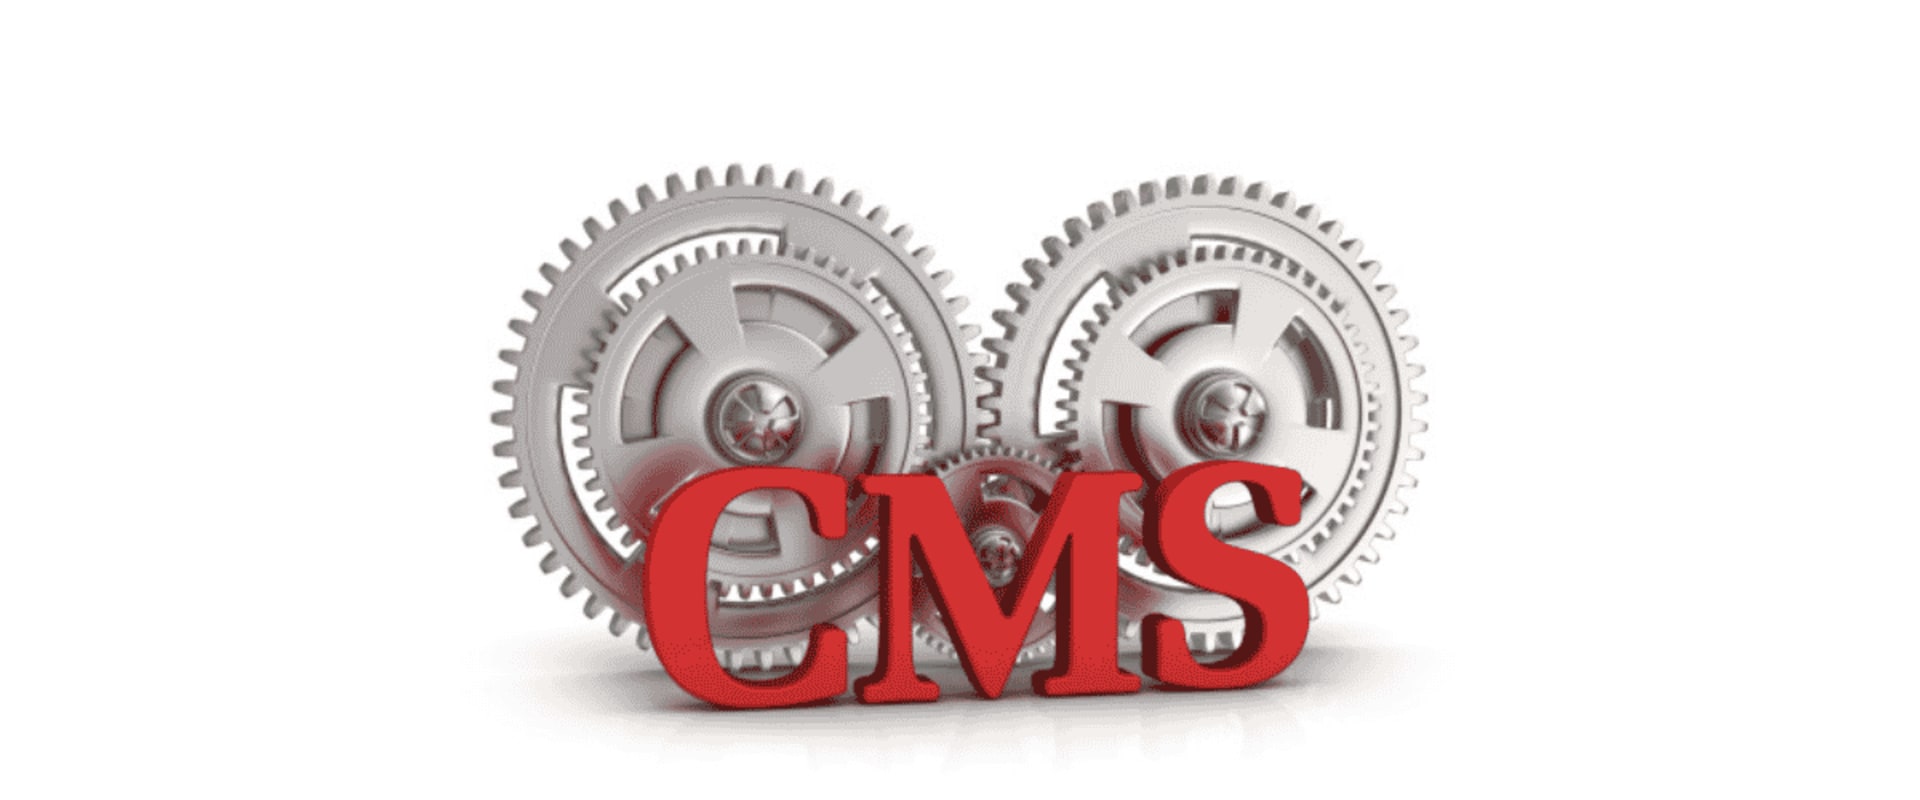 Content Management Systems (CMS): What You Need to Know